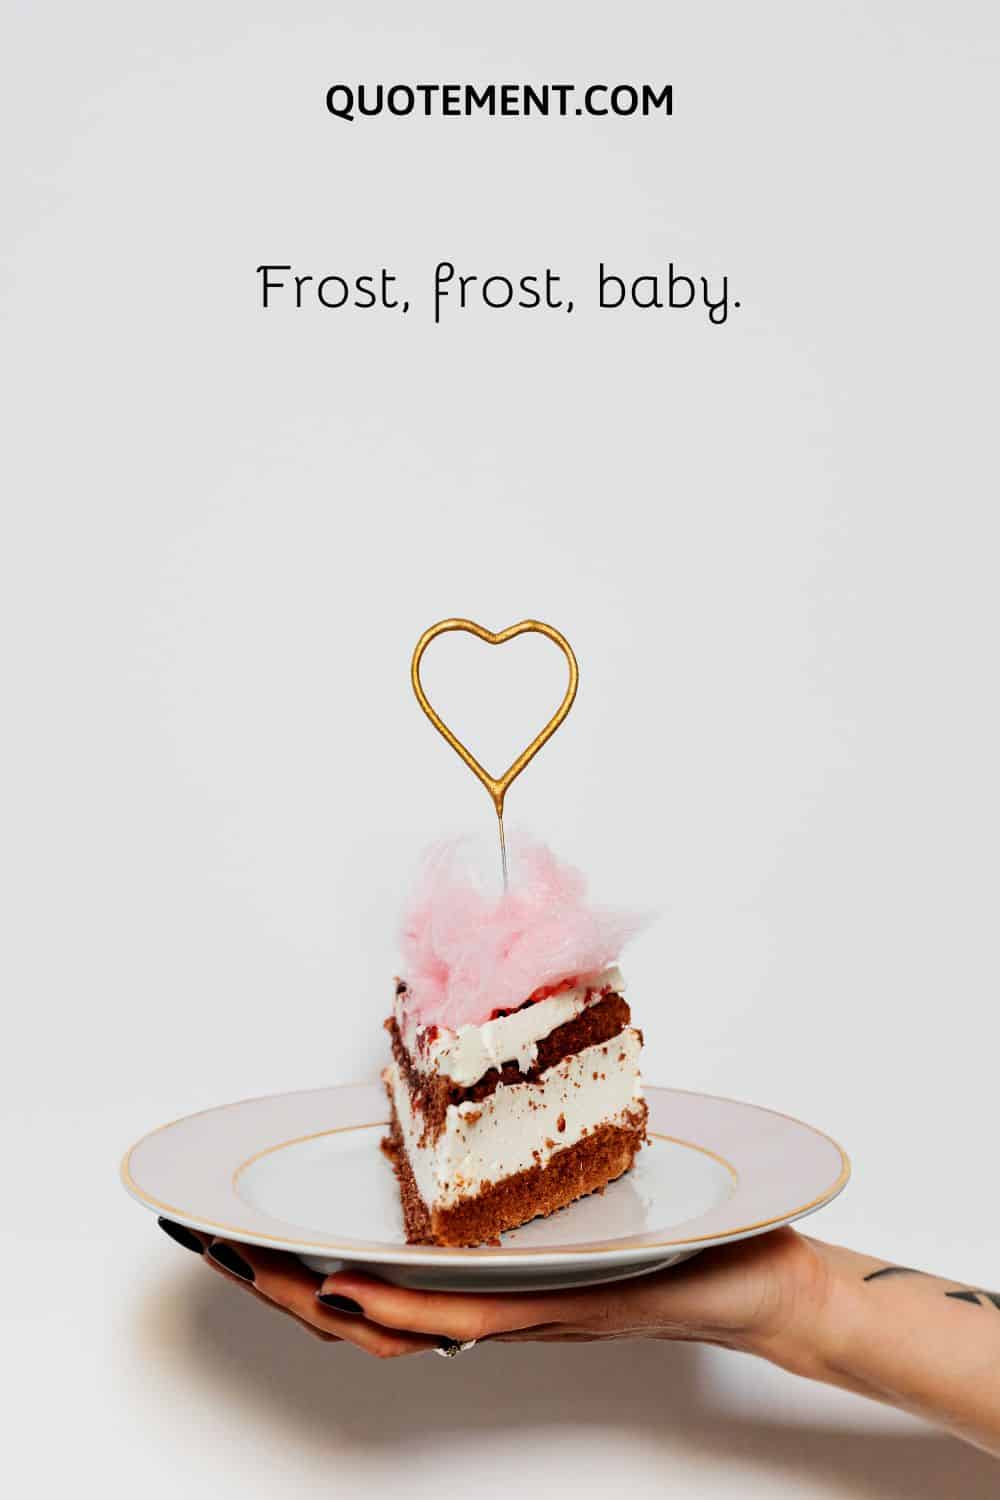 Frost, frost, baby